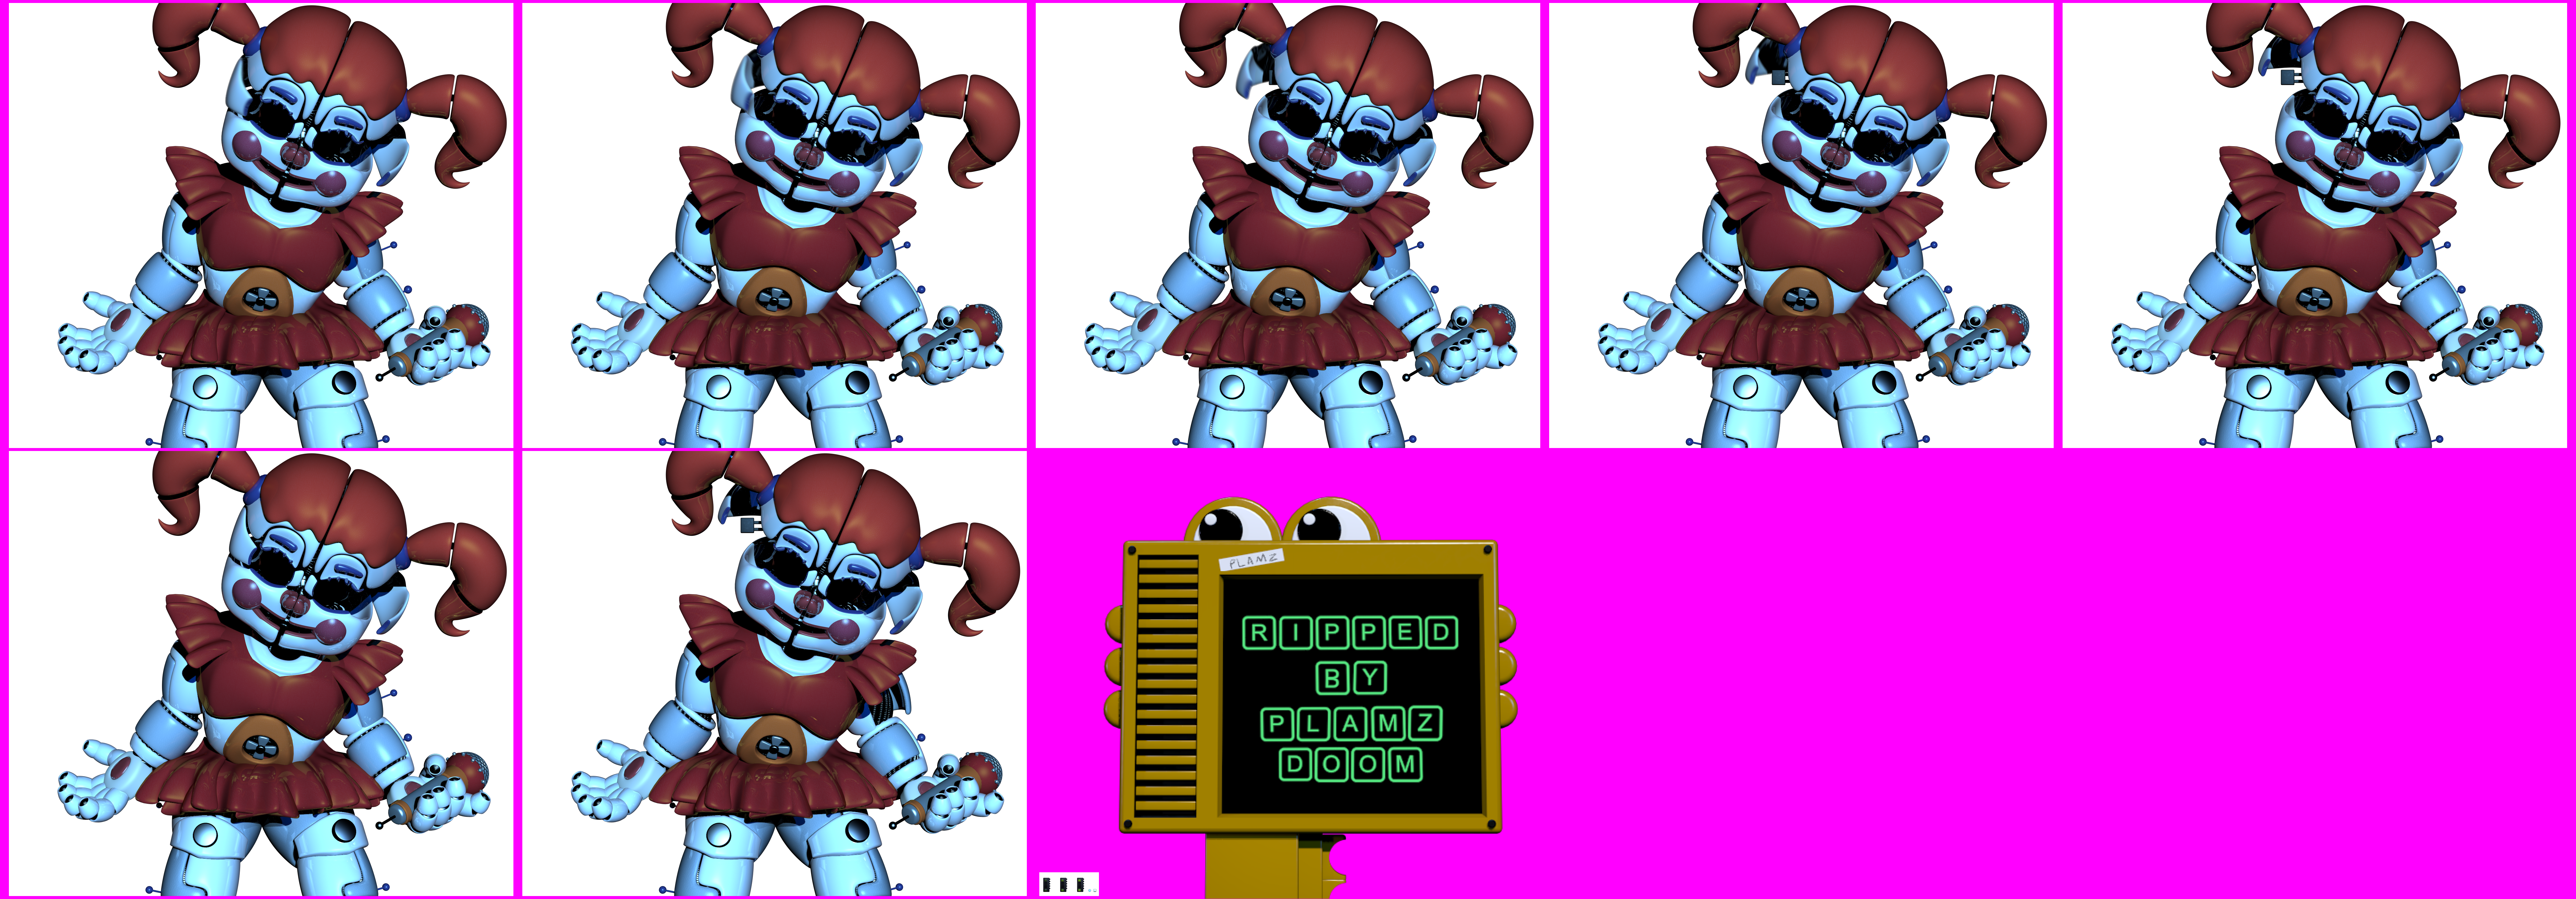 Five Nights at Freddy's: Sister Location - Circus Baby (Parts/Service)